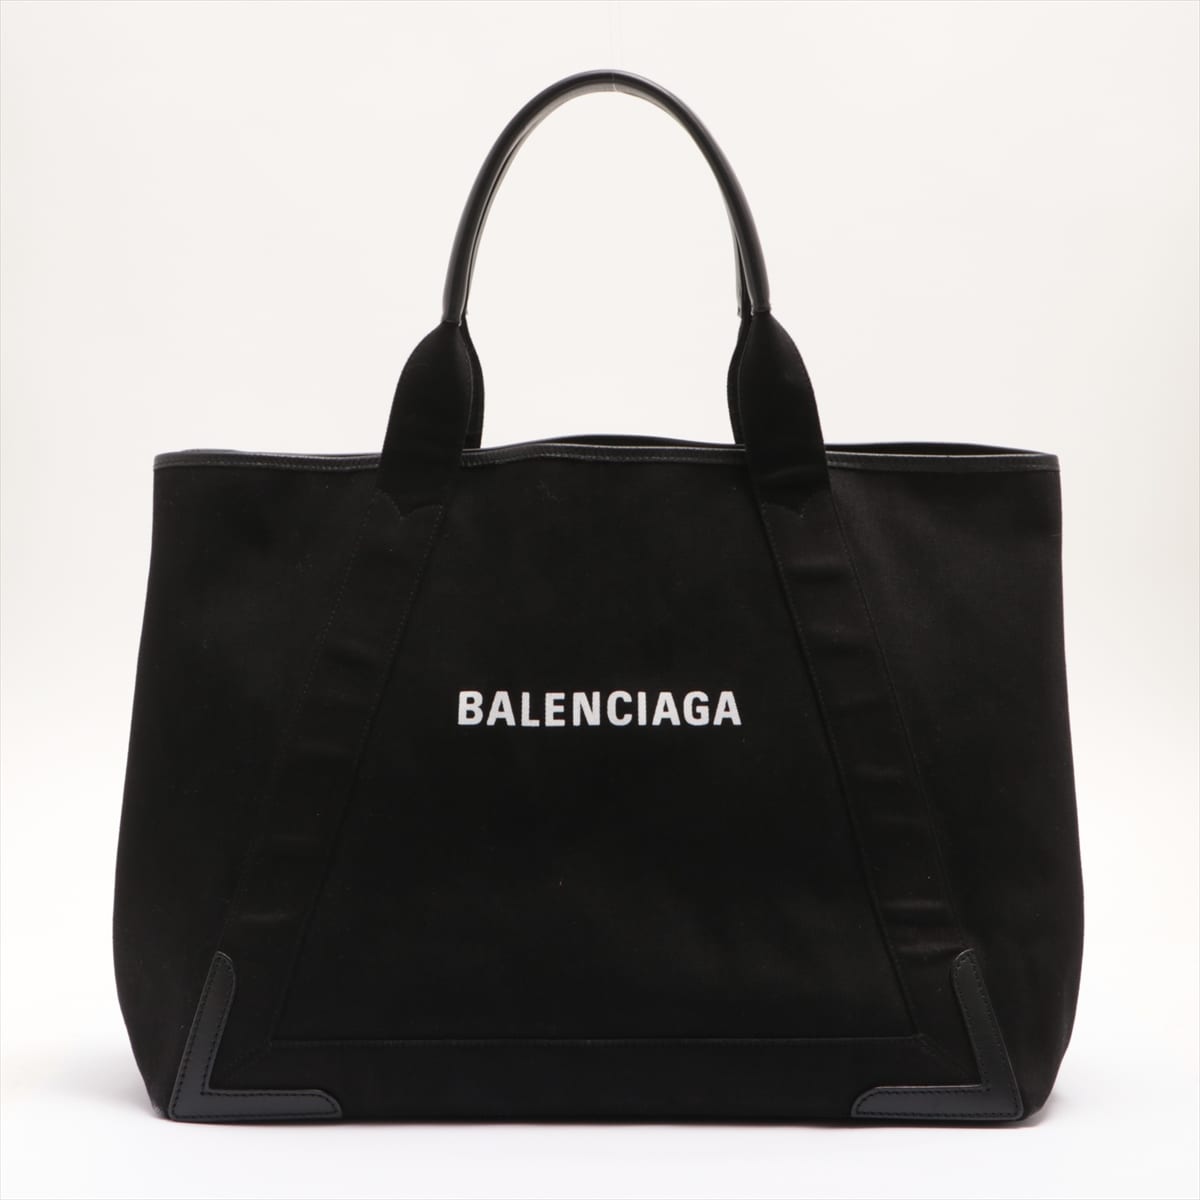 Balenciaga Navy Cabas M Canvas & leather Hand bag Black 339936 with pouch